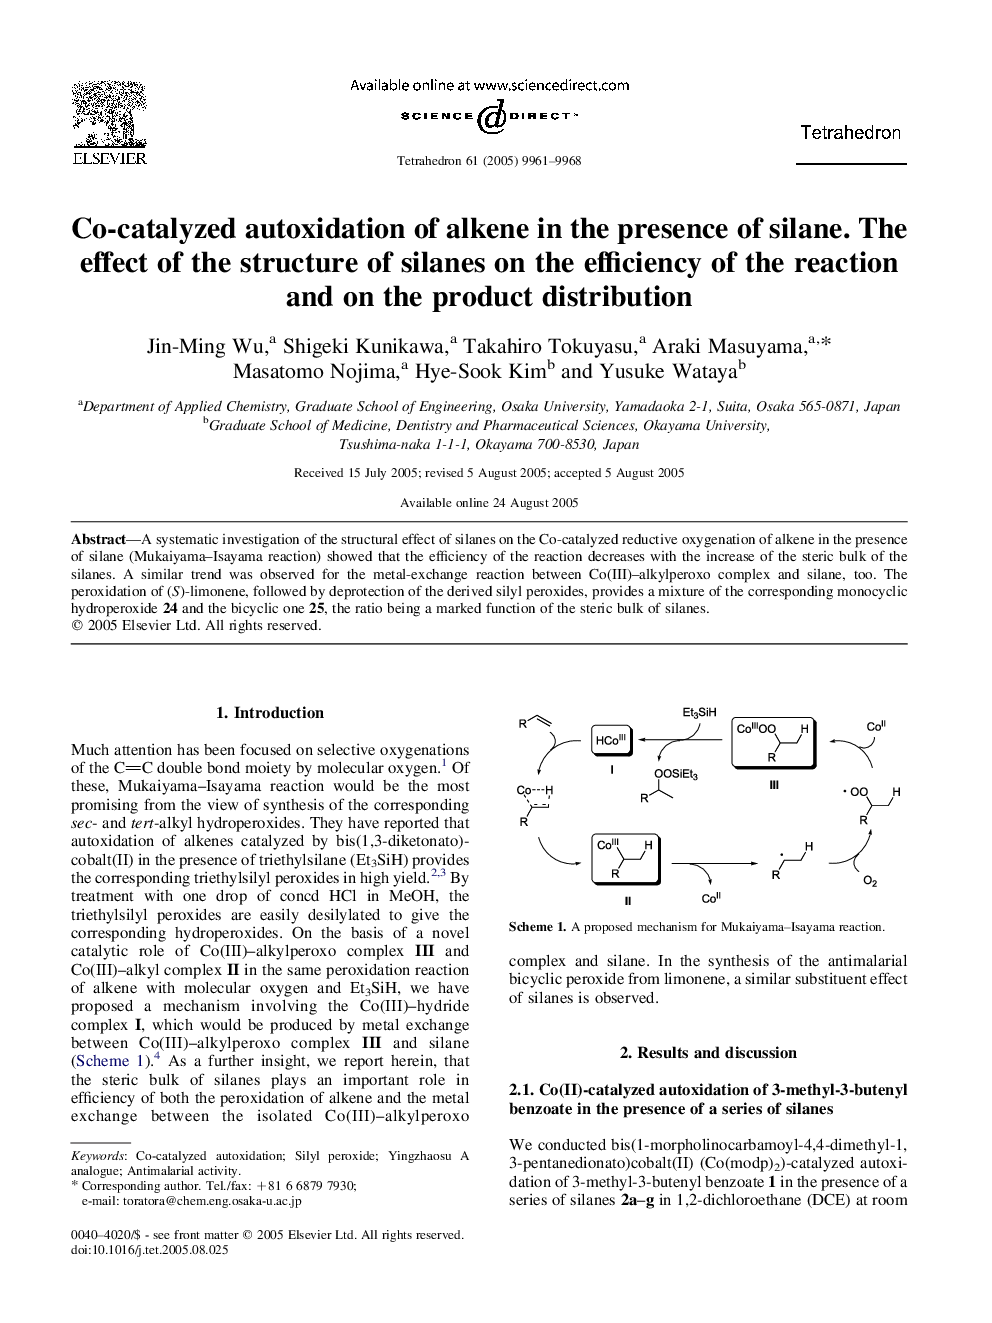 Co-catalyzed autoxidation of alkene in the presence of silane. The effect of the structure of silanes on the efficiency of the reaction and on the product distribution